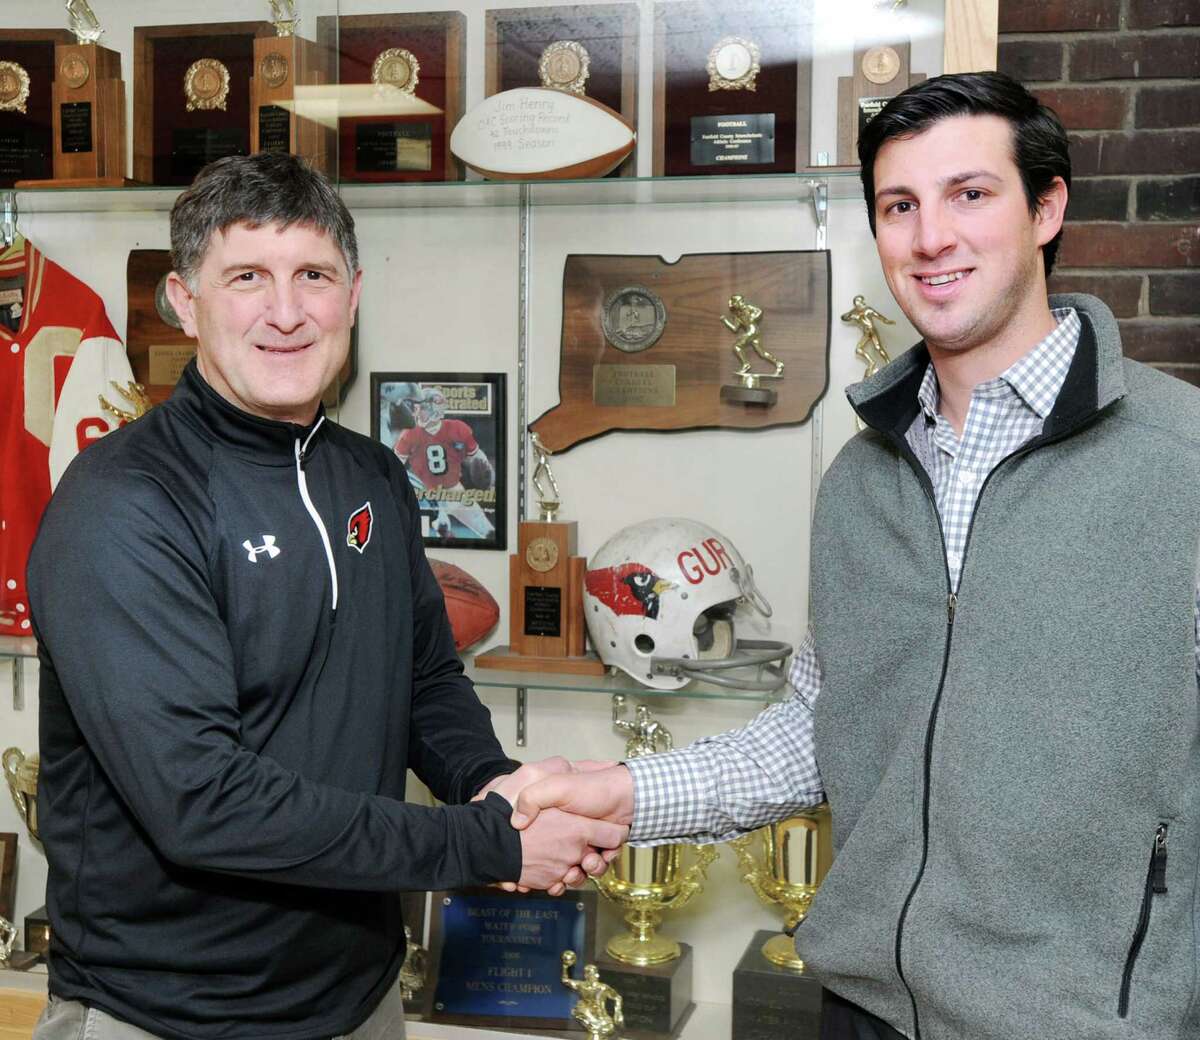 At left, Gus Lindine, Greenwich High School athletic director, shakes hands with John Marinelli who was named the new Greenwich High School football coach during an announcement at the school in Greenwich, Conn., Wednesday, April 8, 2015. Marinelli is the son of New Canaan High School football coach, Lou Marinelli. John Marinelli served as an assistant football coach at New Canaan High School under his father.